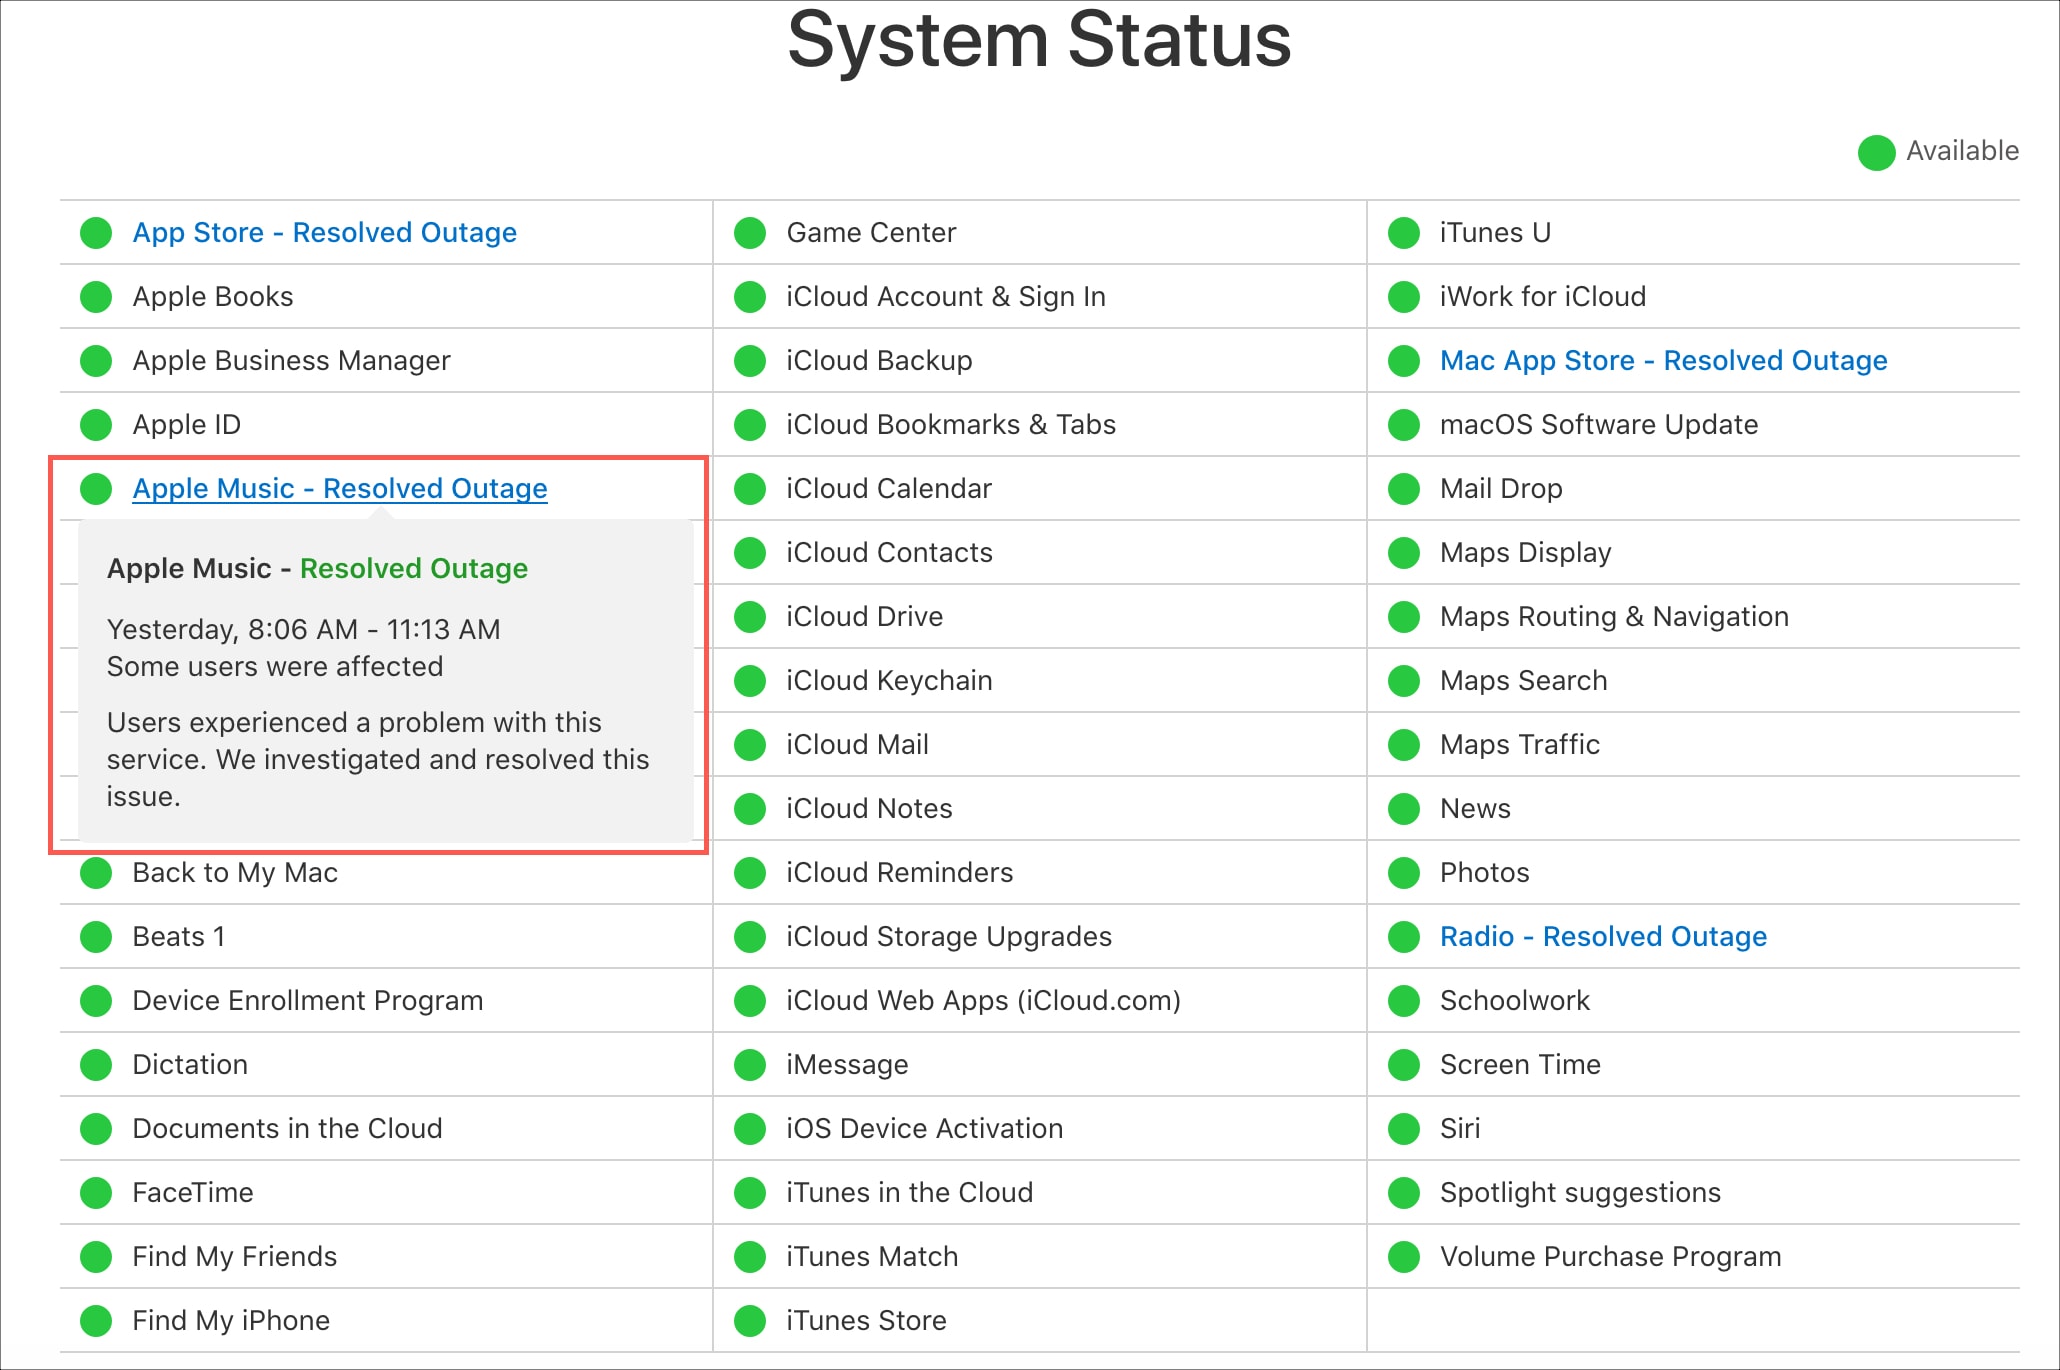 Check iCloud server status: Visit Apple's System Status page (support.apple.com/systemstatus) to ensure that iCloud services are not experiencing any outages or disruptions.
Contact Apple Support: If none of the above solutions work, consider reaching out to Apple Support for further assistance and troubleshooting steps.